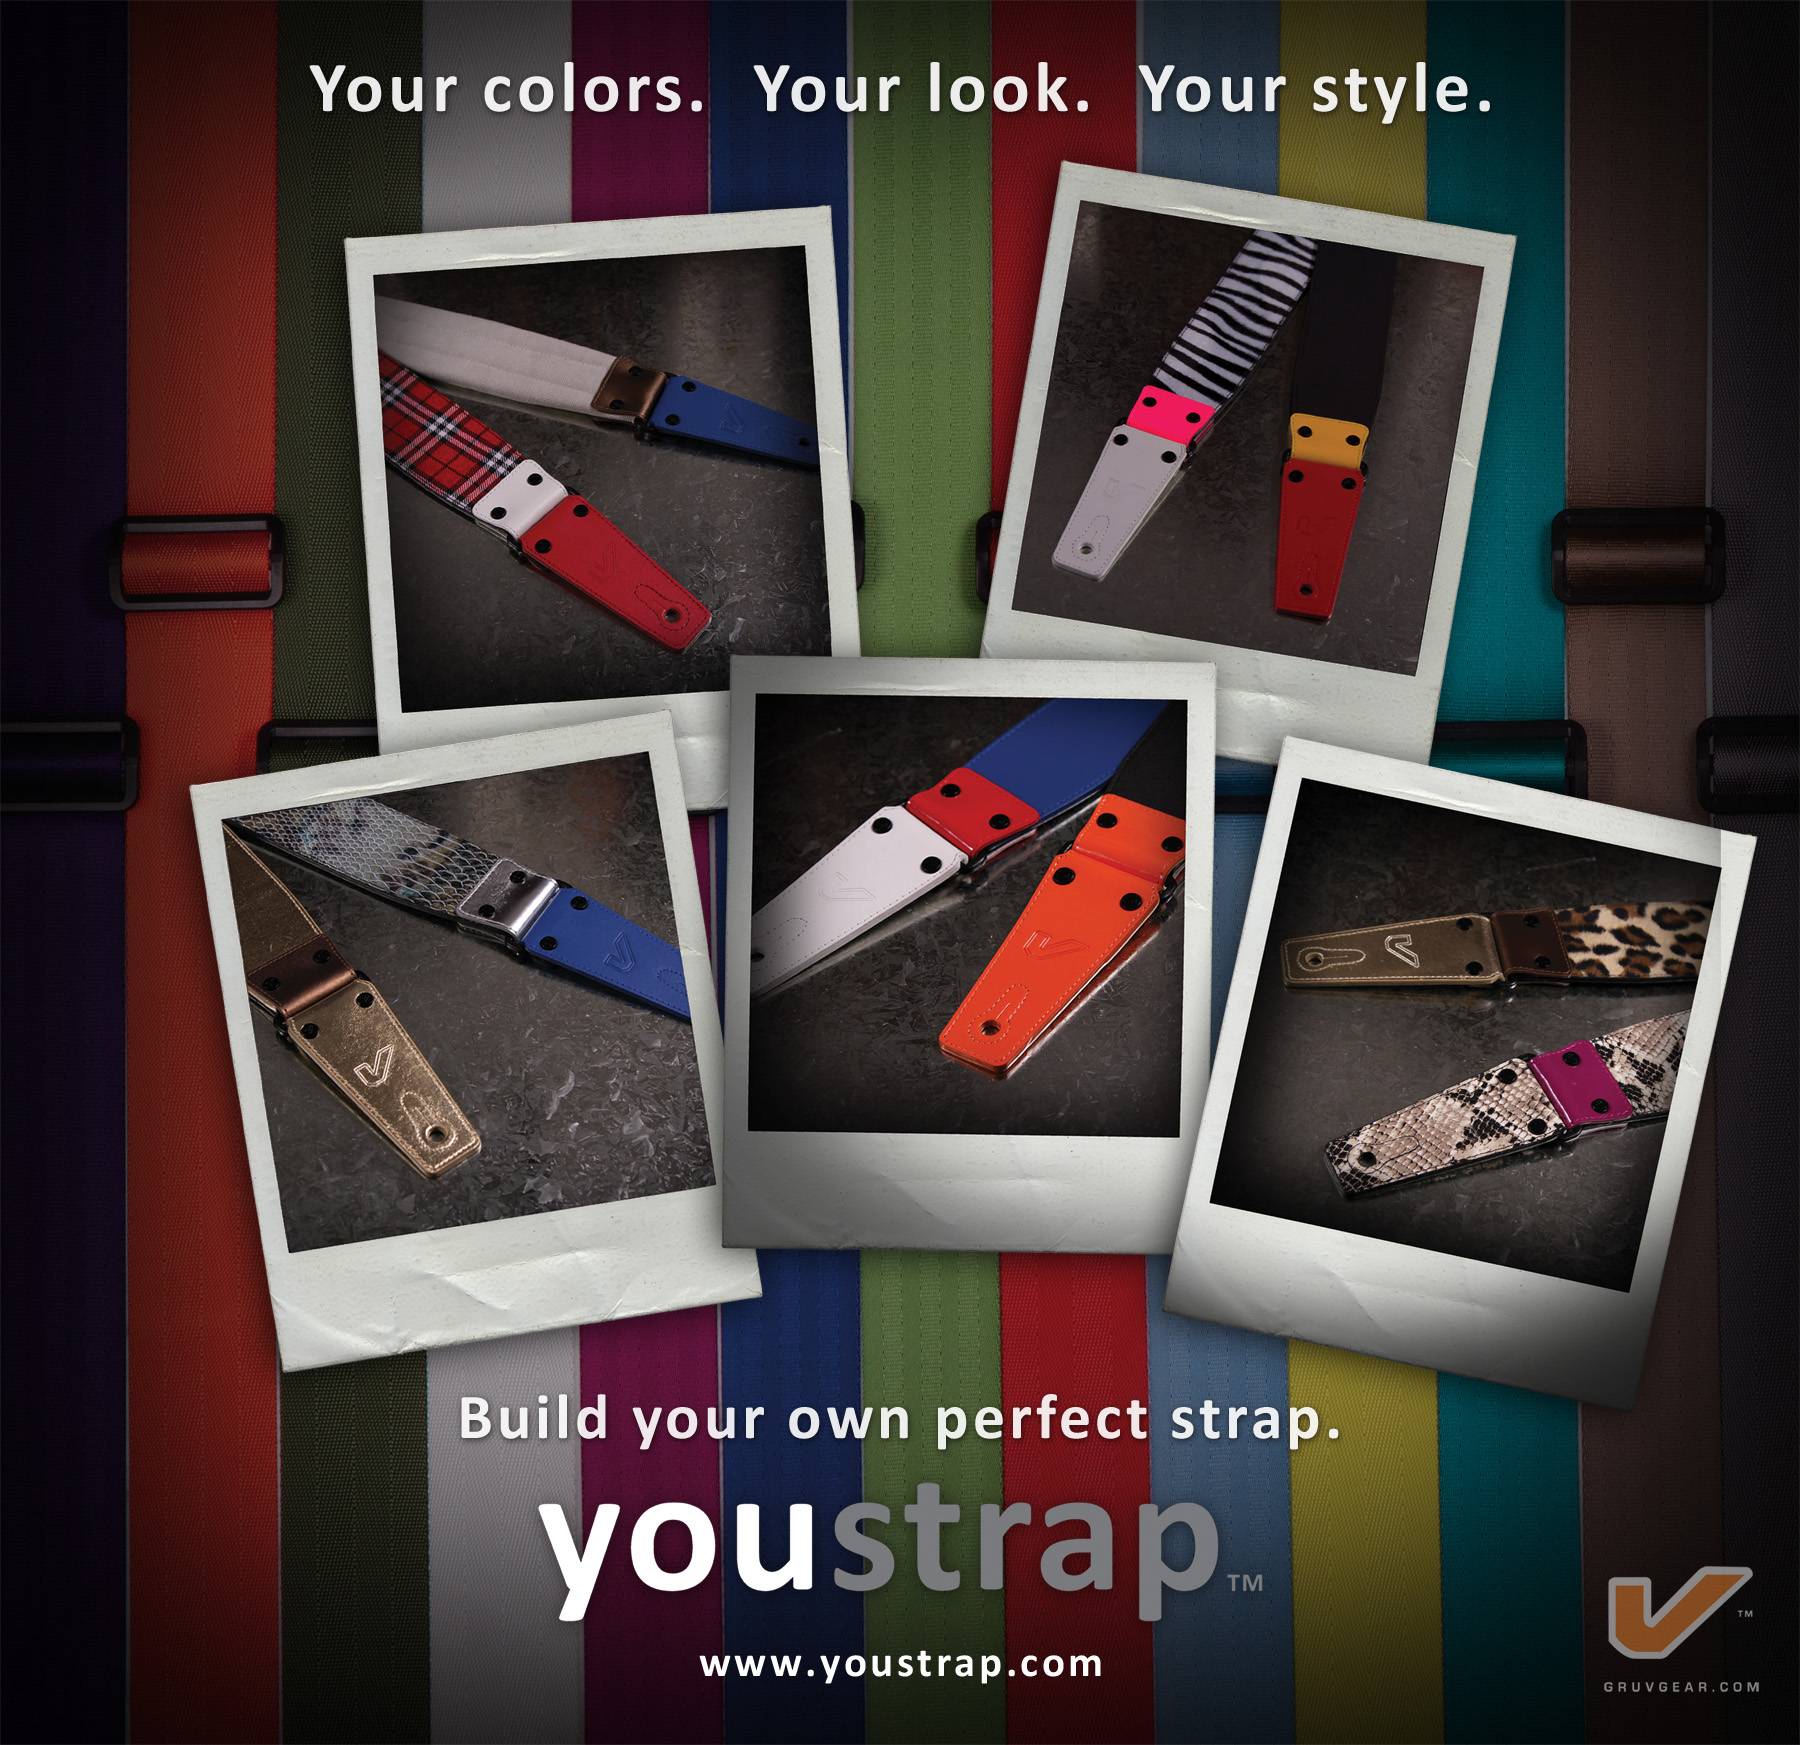 Gruv Gear Announces World’s First Do-It-Yourself (DIY) Guitar Strap